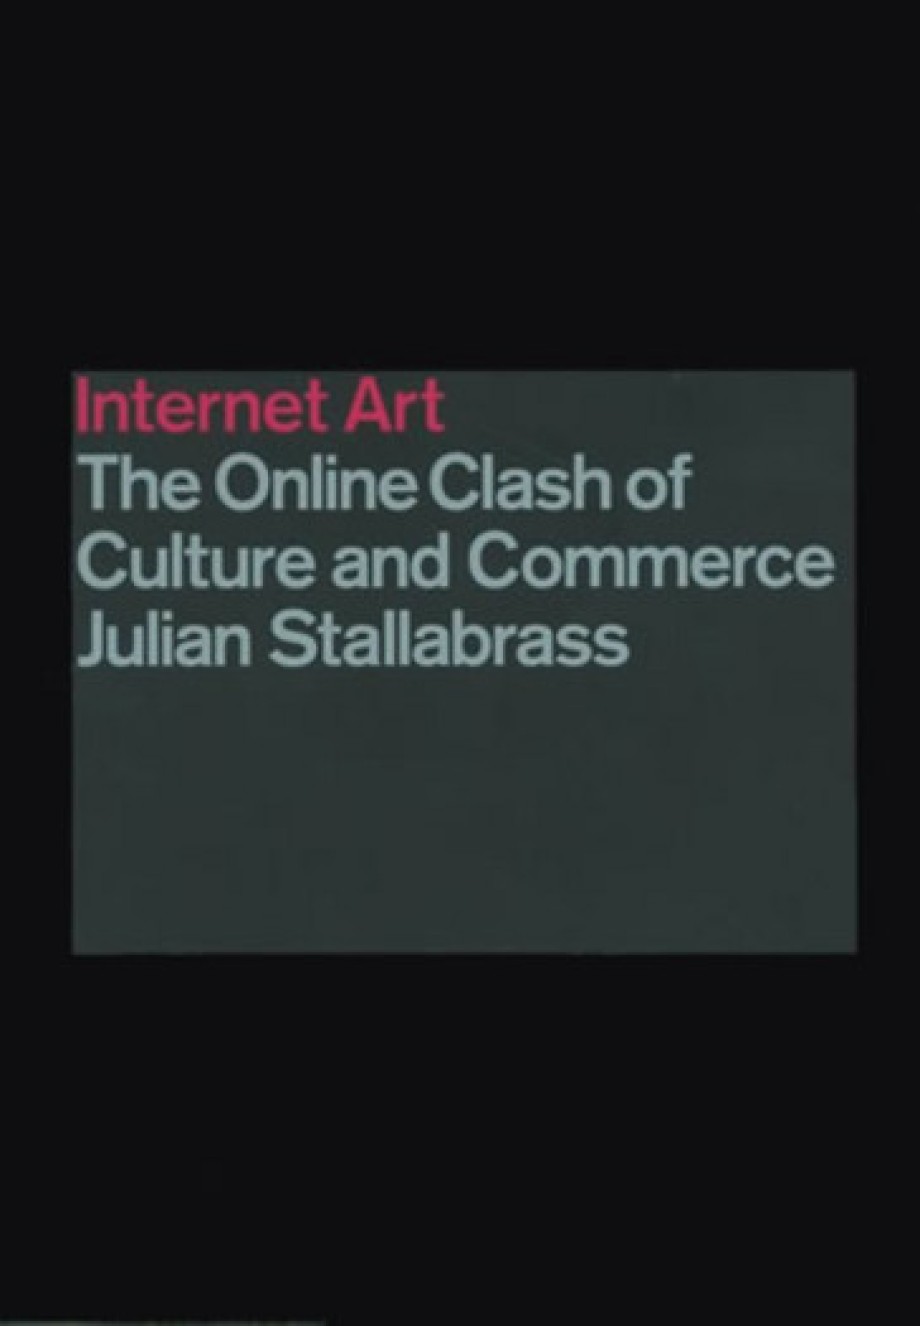 Internet Art The Online Clash of Culture and Commerce